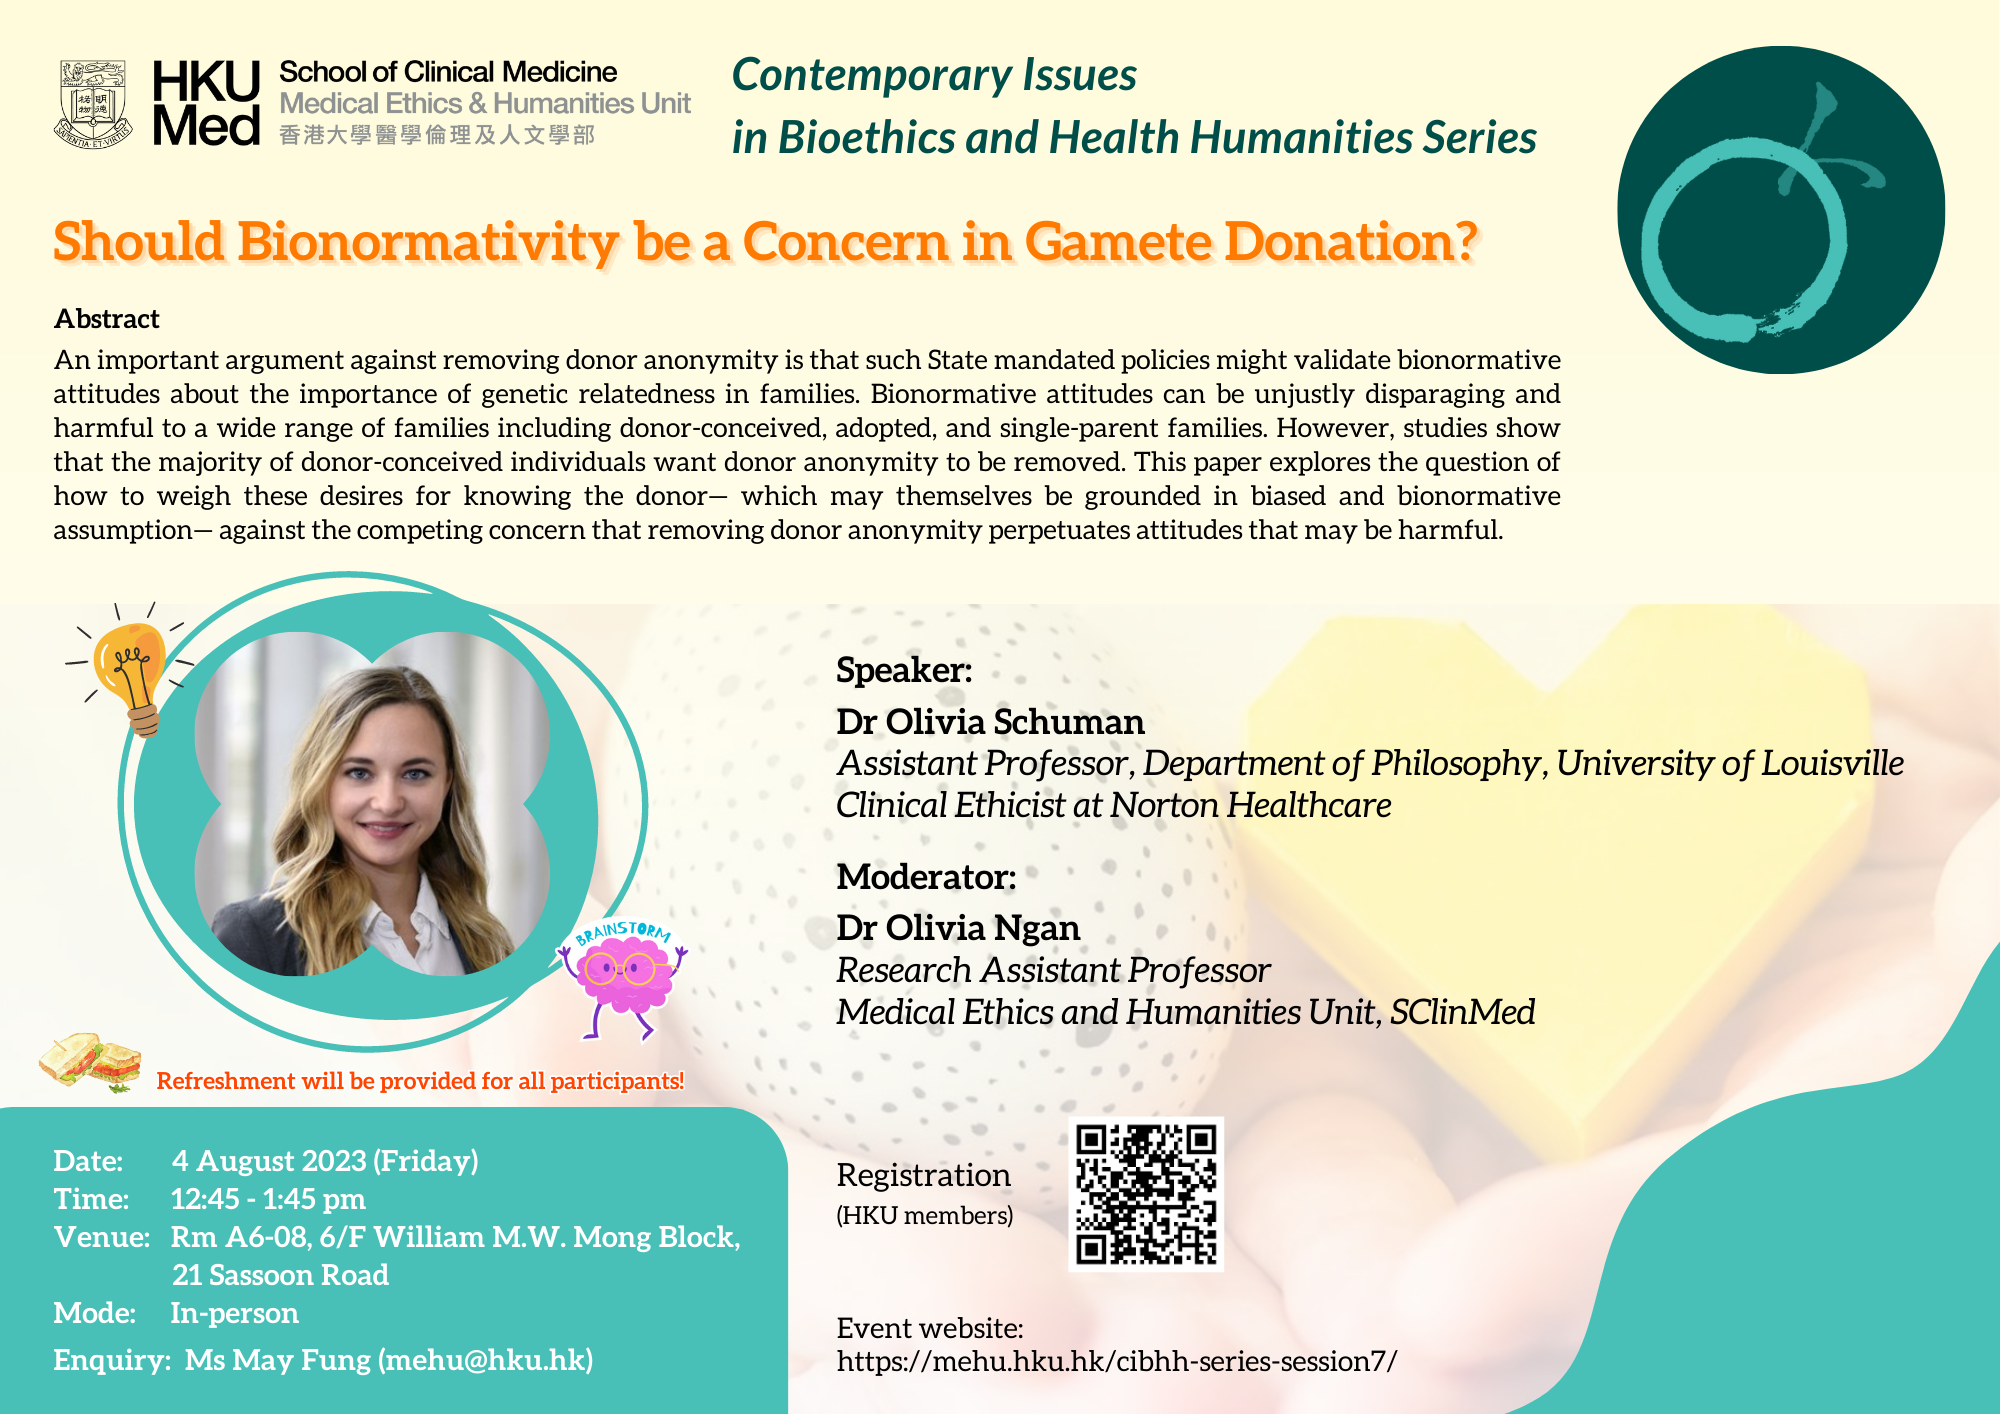 Should Bionormativity be a Concern in Gamete Donation?